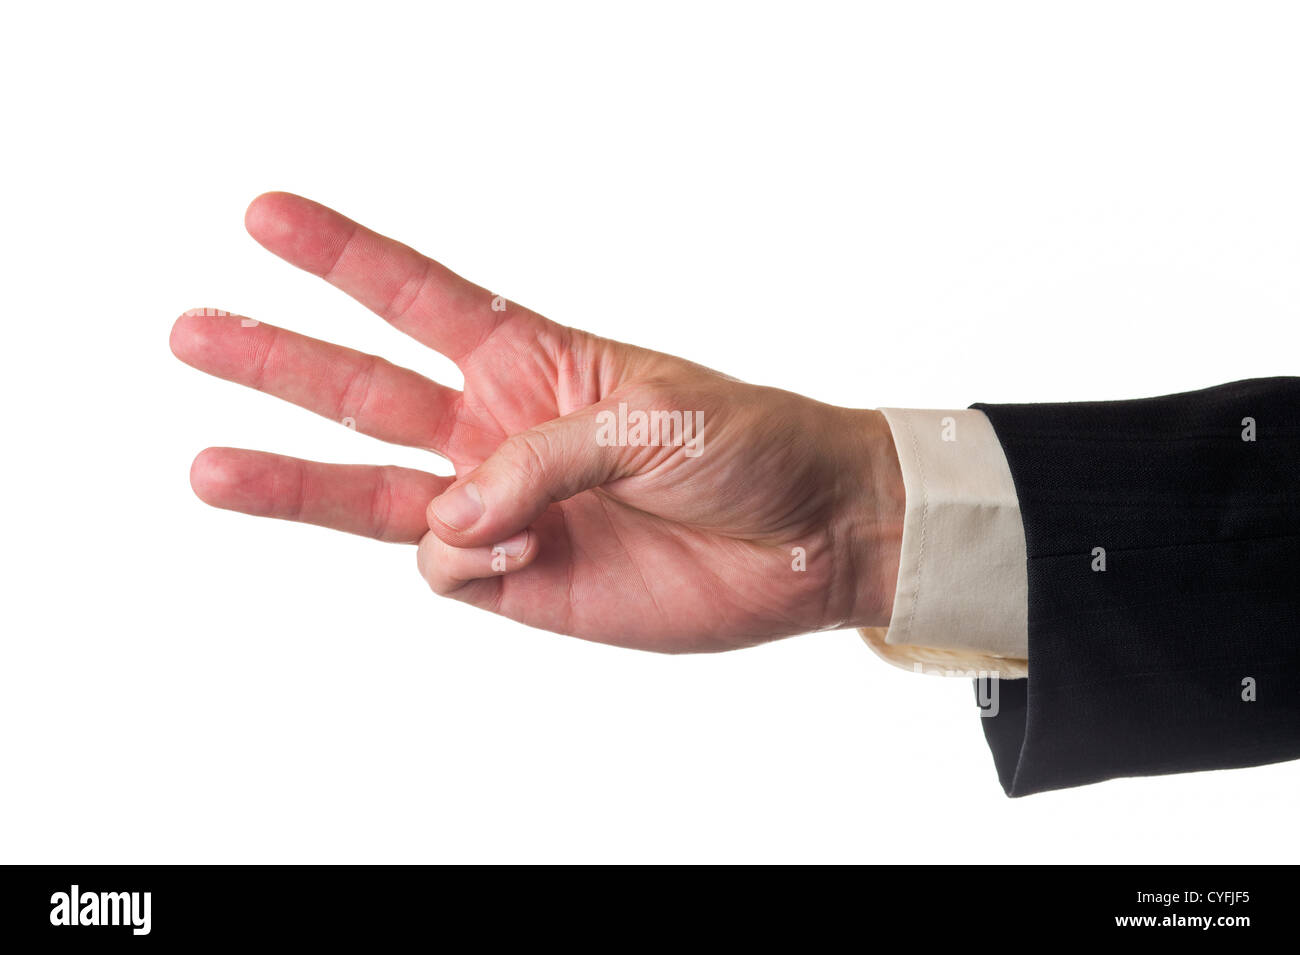 Man showing three fingers, suit sleeve and white isolated background. Stock Photo